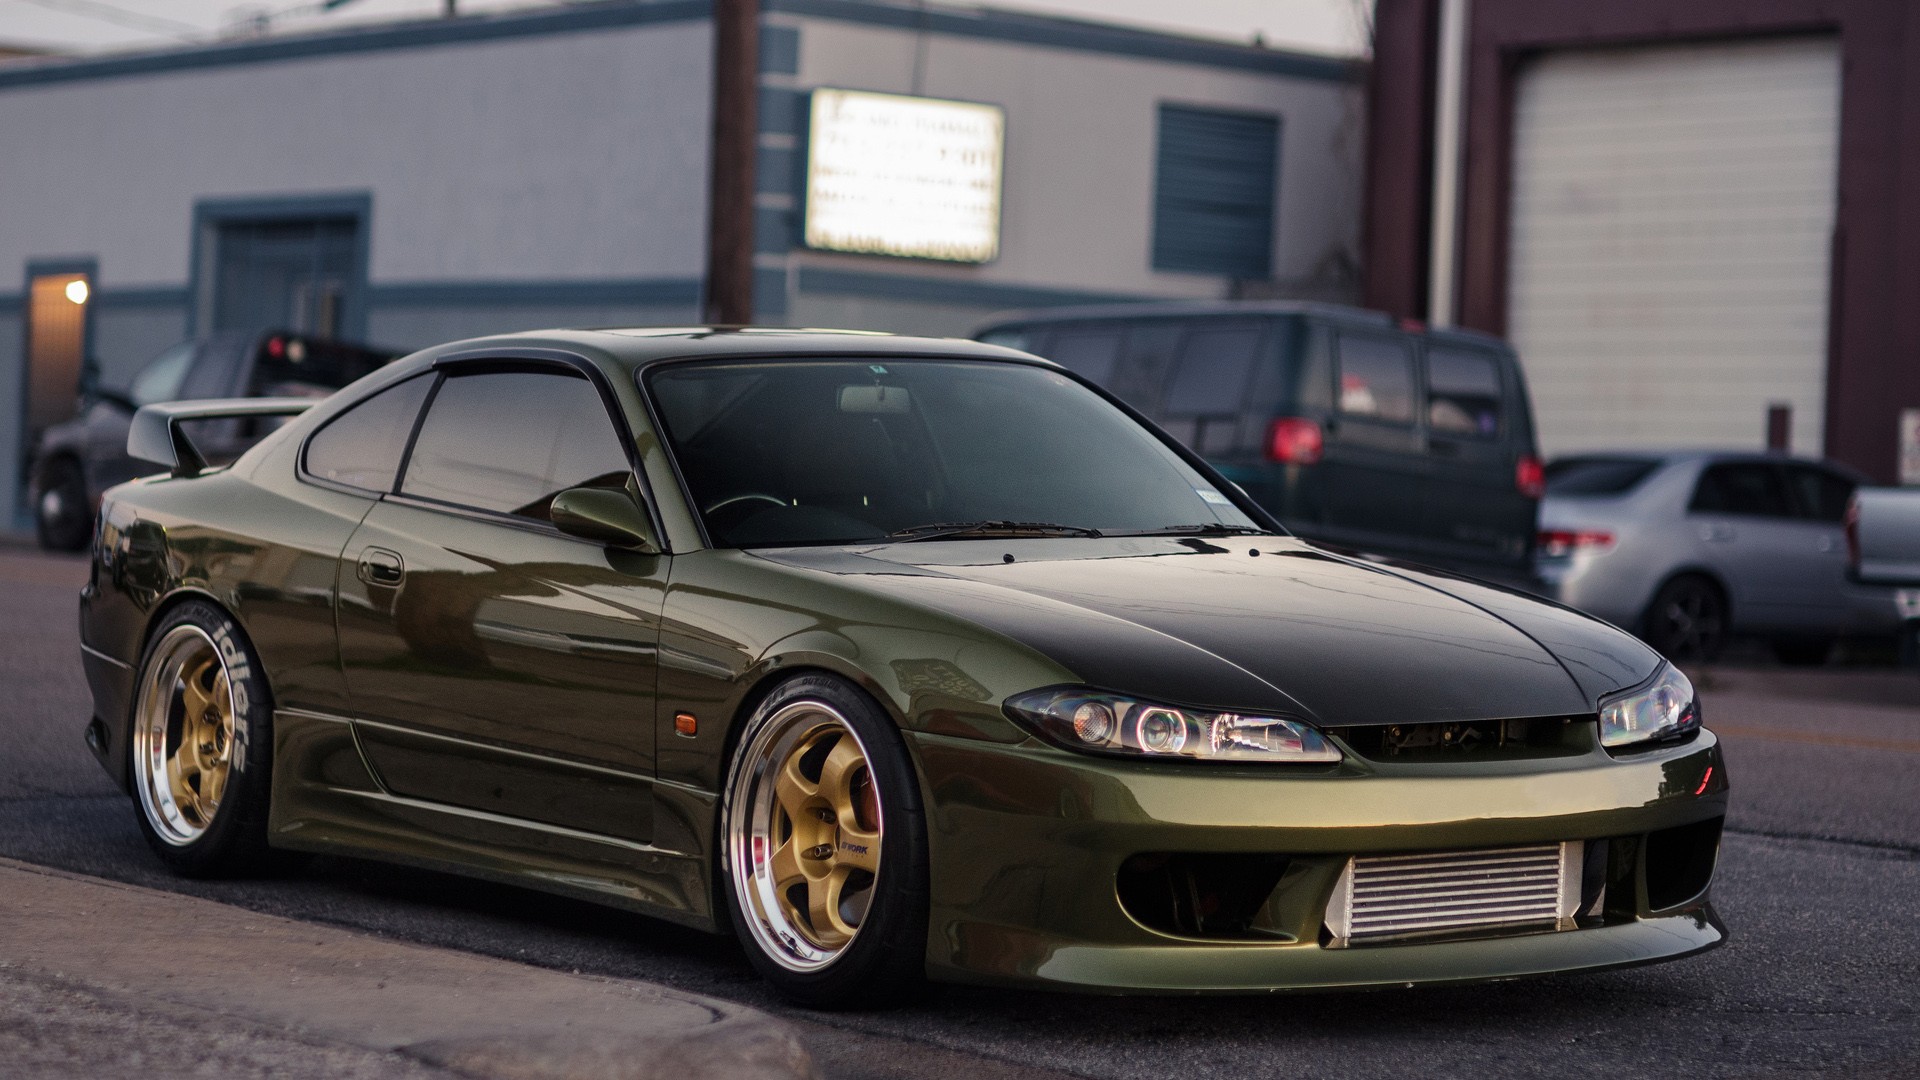 Nissan Silvia S15 Jdm | Images and Photos finder